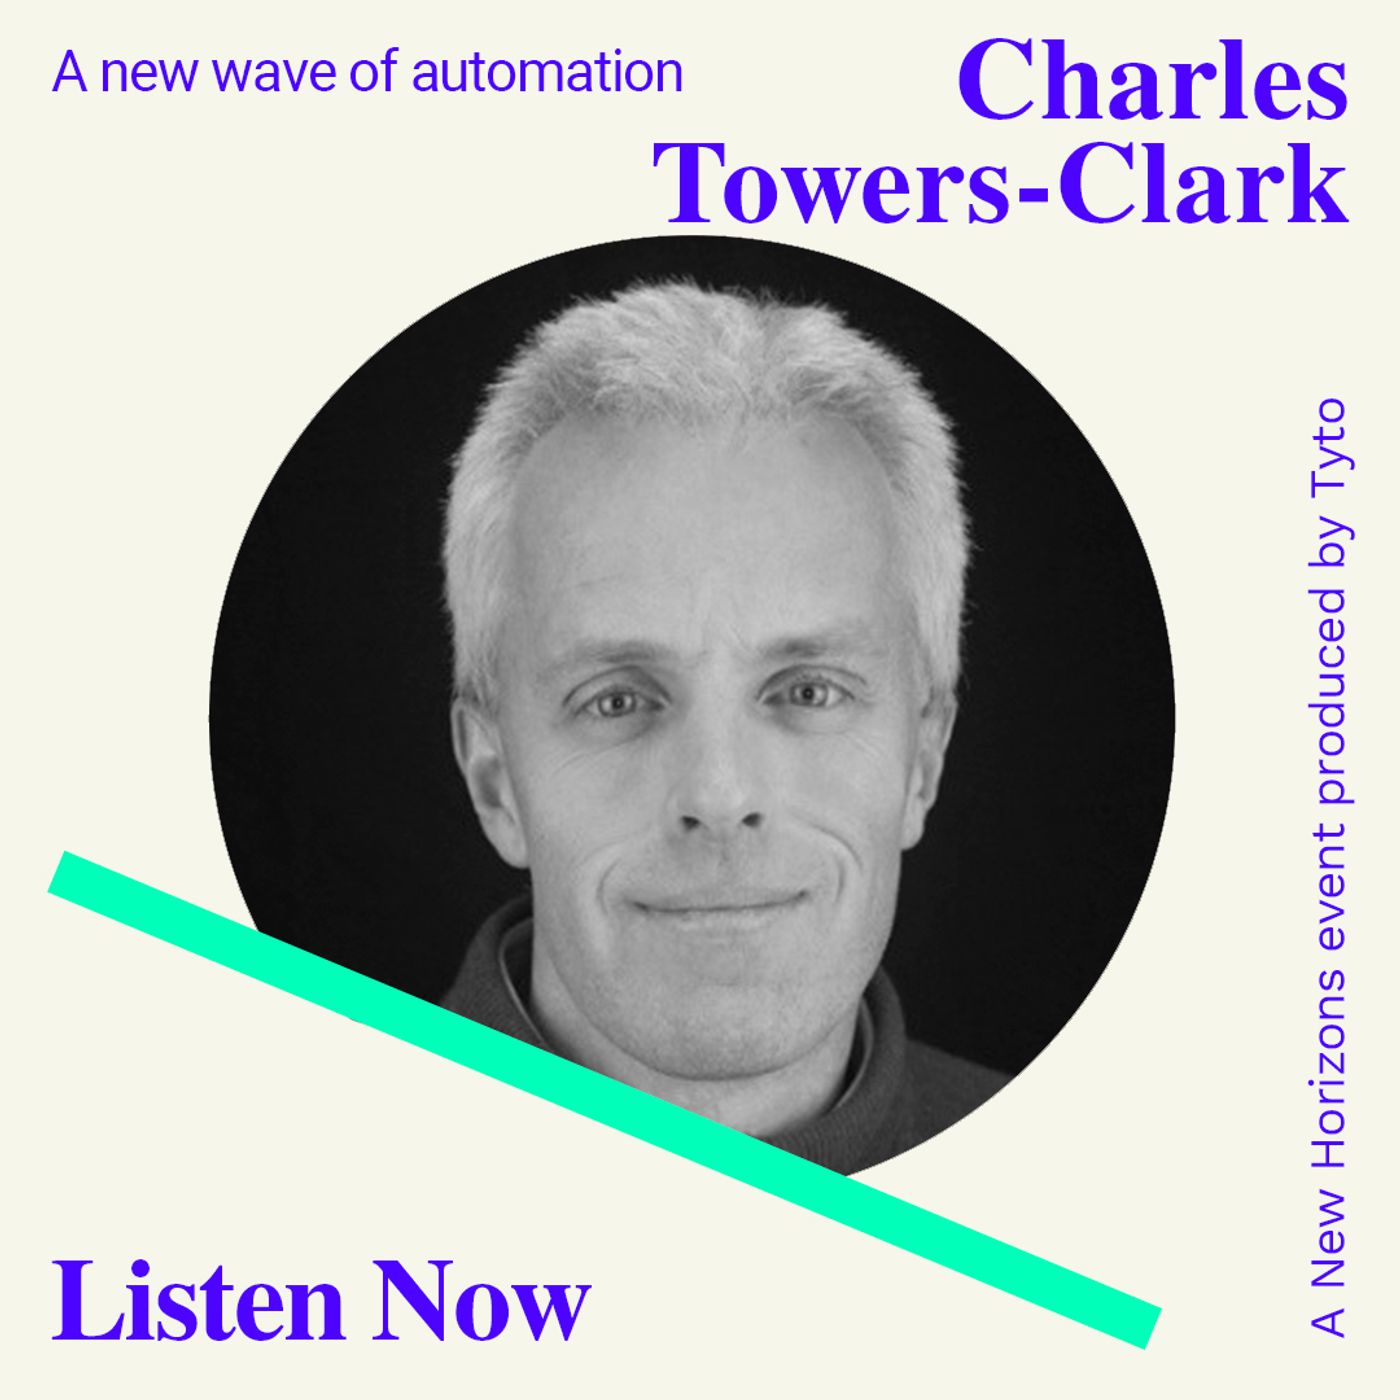 S2 Ep9: Charles Towers-Clark - A new wave of automation - New Horizons Special 07